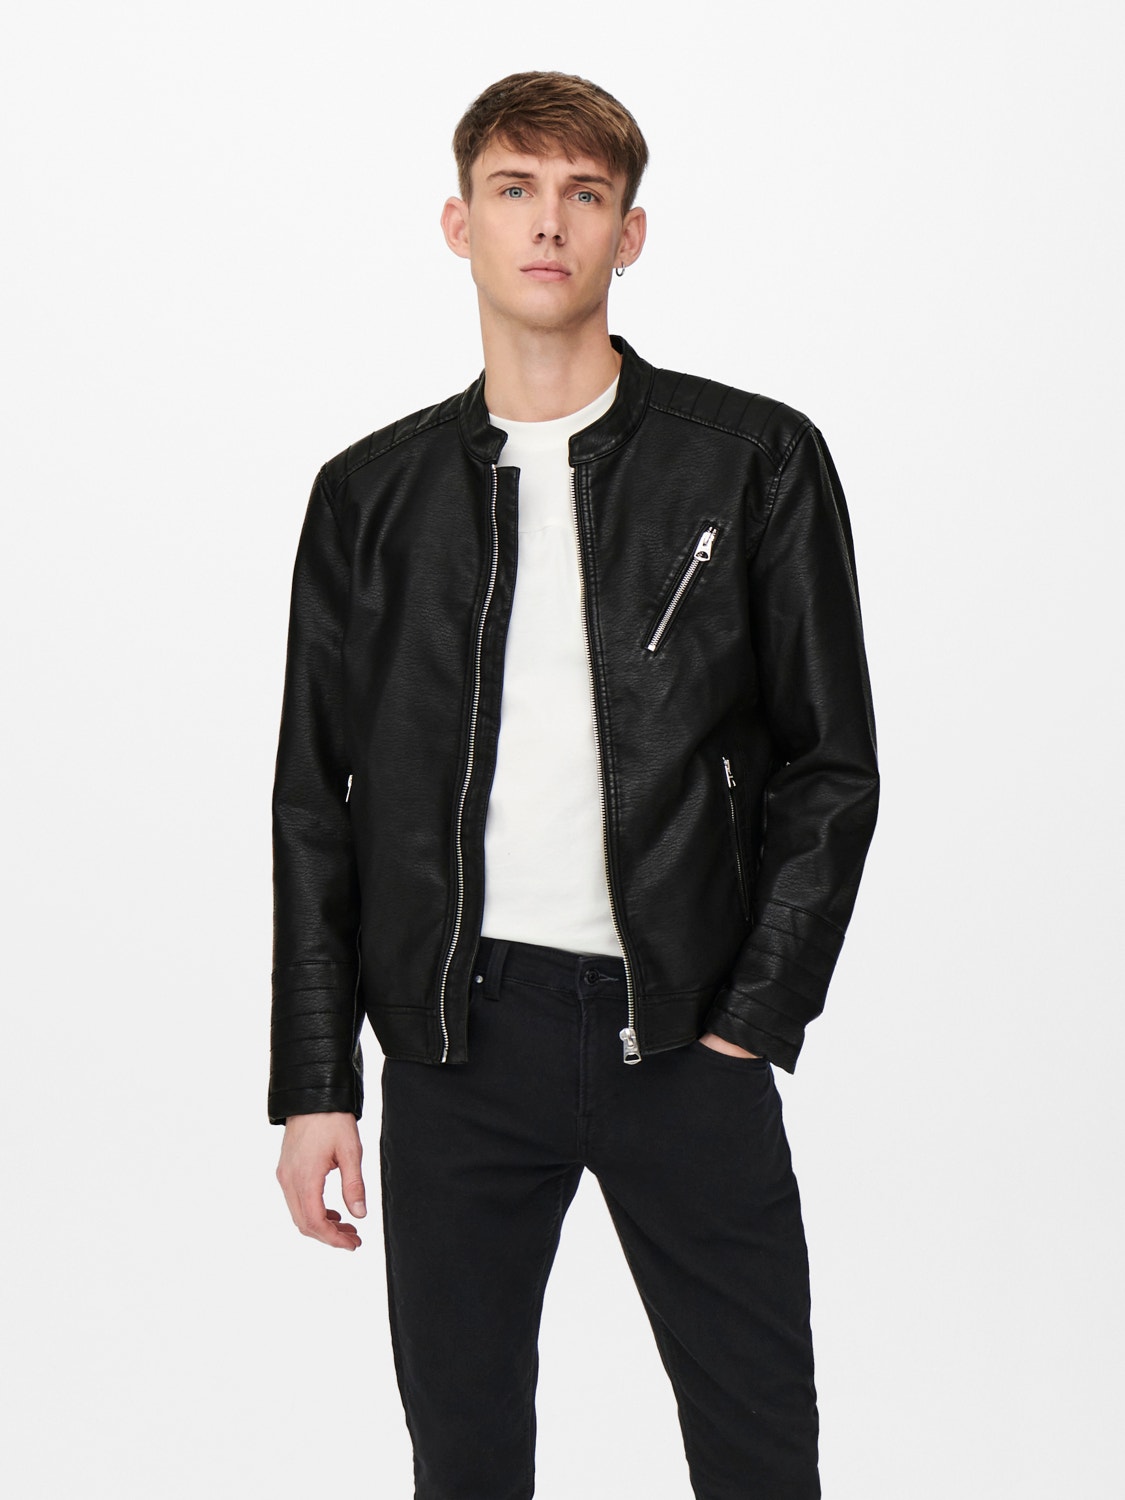 ONLY & SONS Jacke -Black - 22020741